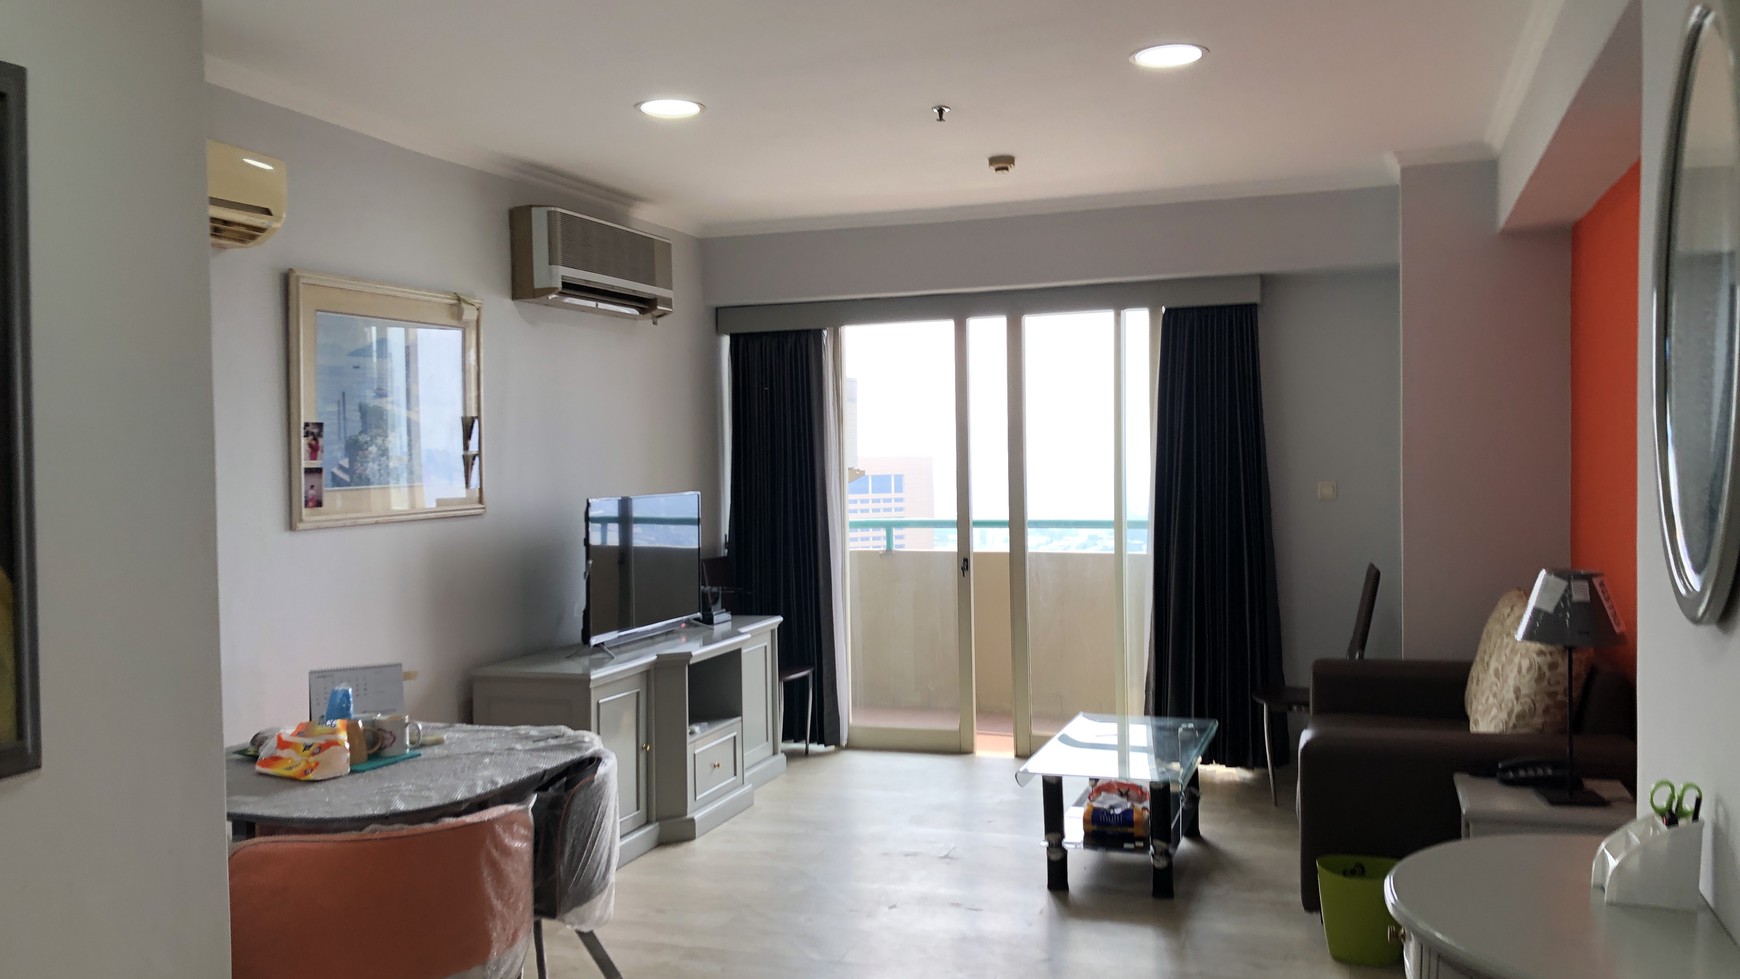 For Rent 3BR Istana Harmoni Newly Renovated Unit